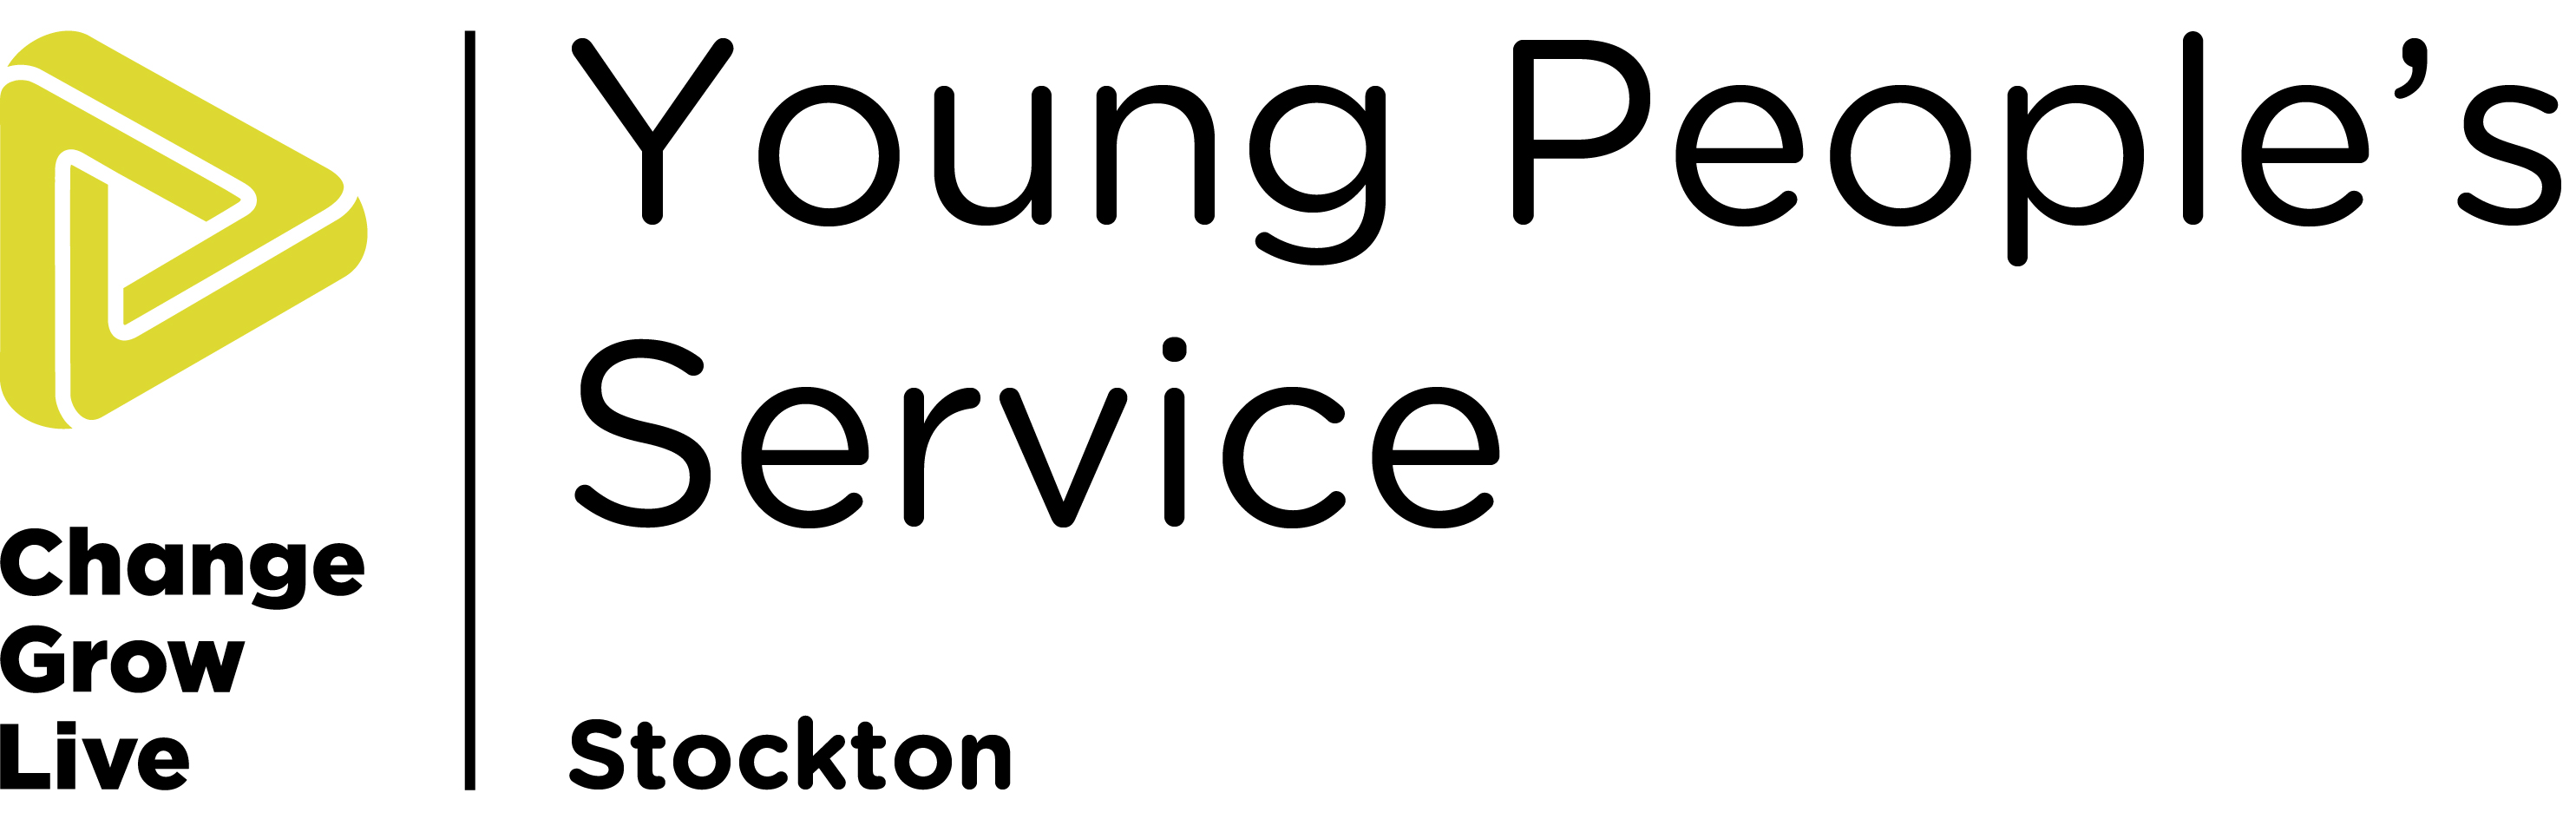 the Stockton young people's logo in colour